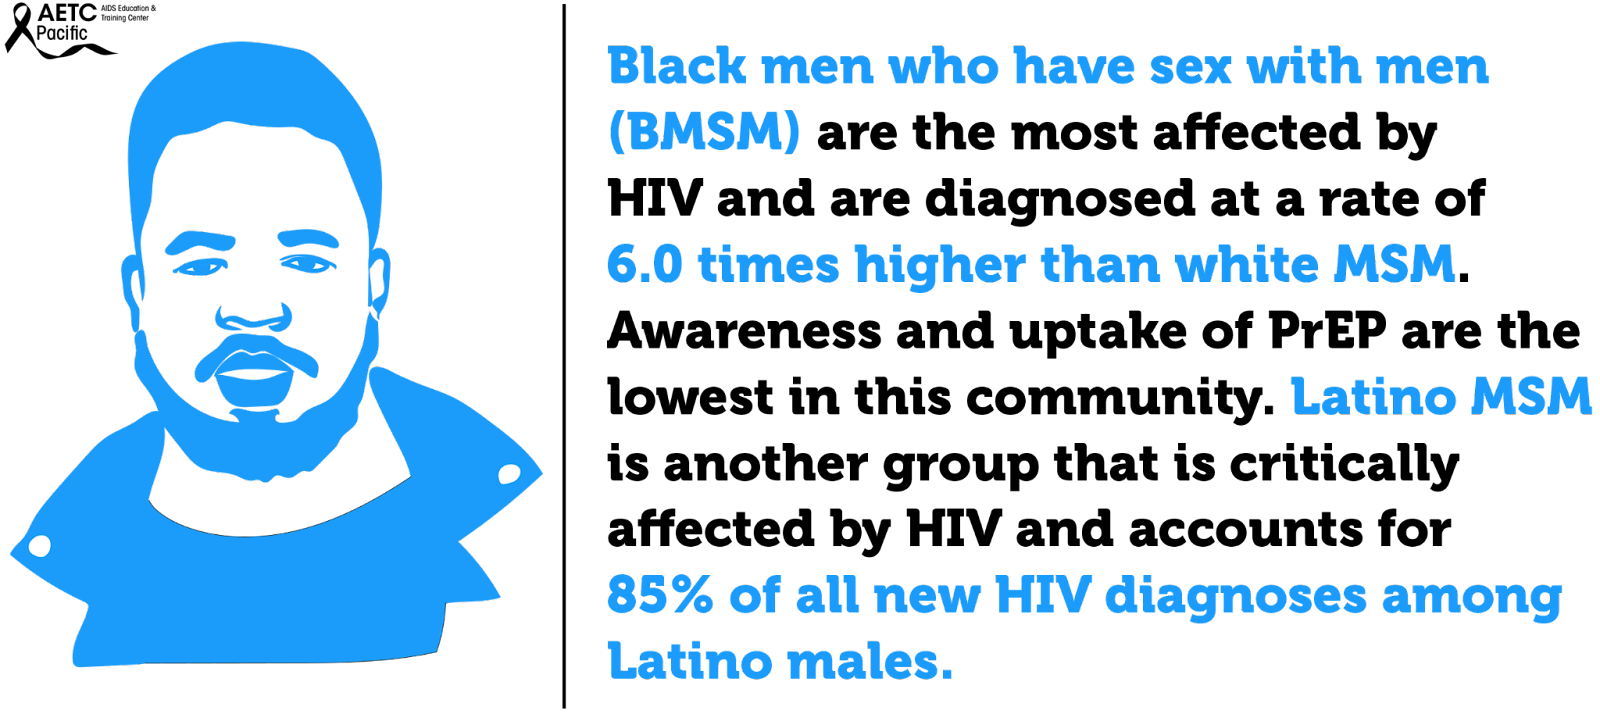 BMSM are the most affected by HIV and are diagnosed at a rate of 6 times higer than white MSM. Awareness and uptake of PrEP are the lowest in this commnity. Latino MSM is another group that is critically affected by HIV and accounts for 85% of all new HIV diagnoses amond Latino males